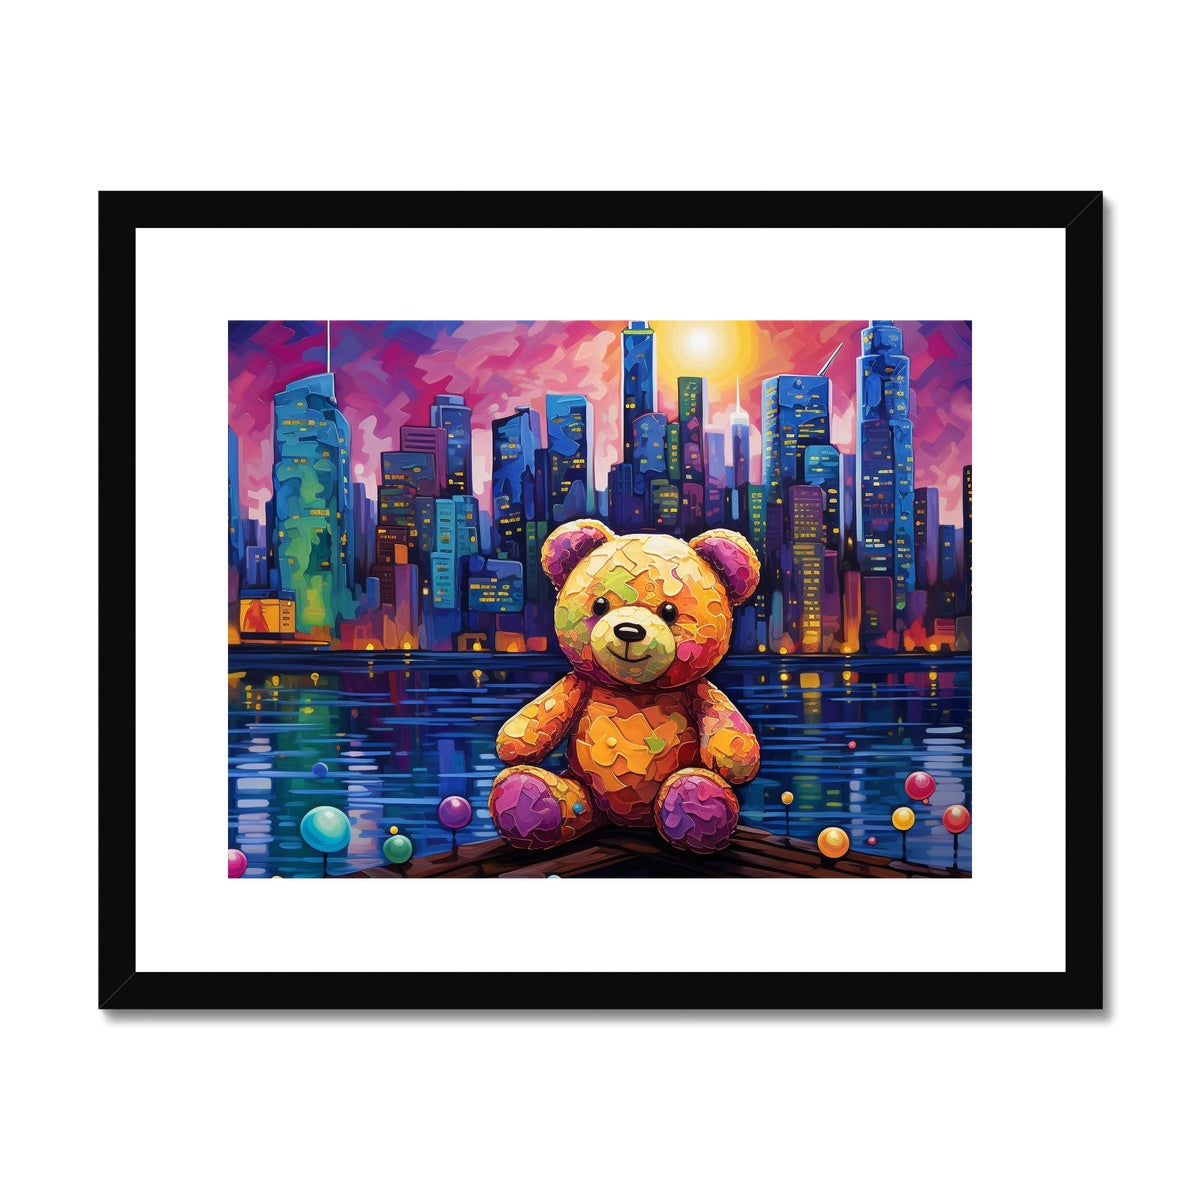 Skyline Attraction: Limited Edition Framed & Mounted Print